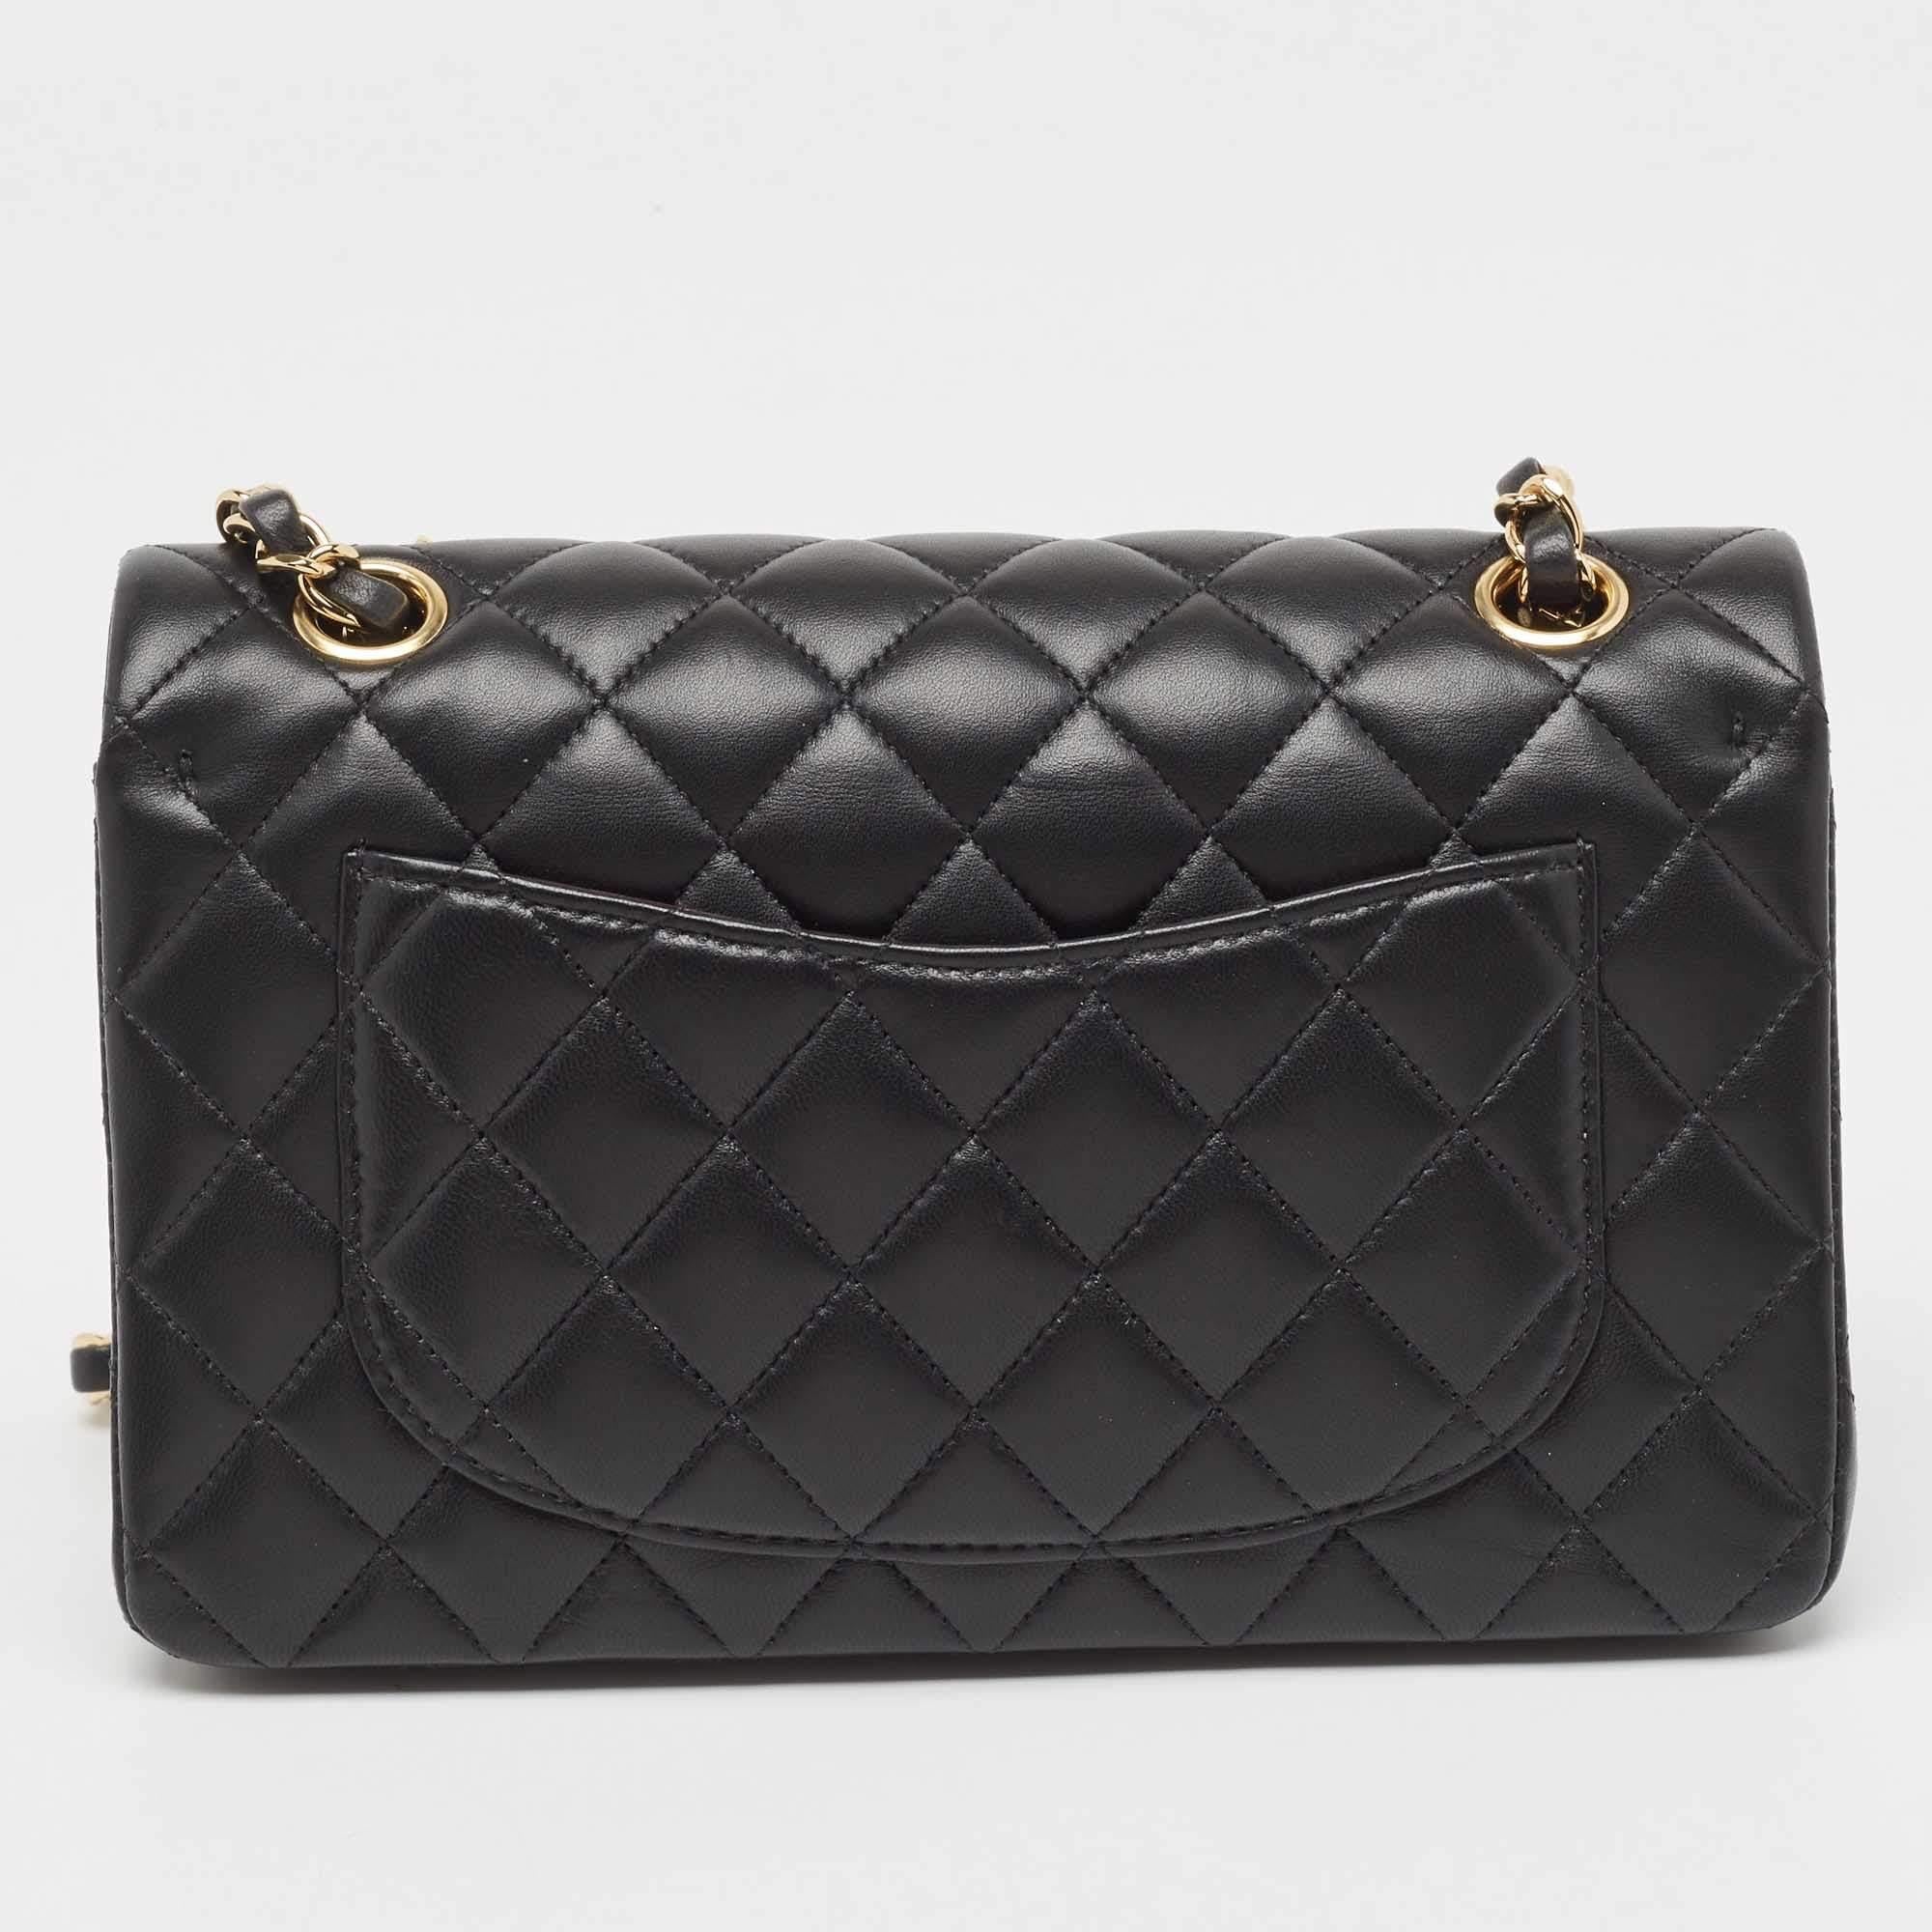 Crafted from sumptuous black quilted leather, the Chanel Classic Double Flap Bag exudes timeless charm and luxury. Its iconic silhouette, adorned with signature gold-tone hardware, offers both style and functionality. With a versatile chain strap,